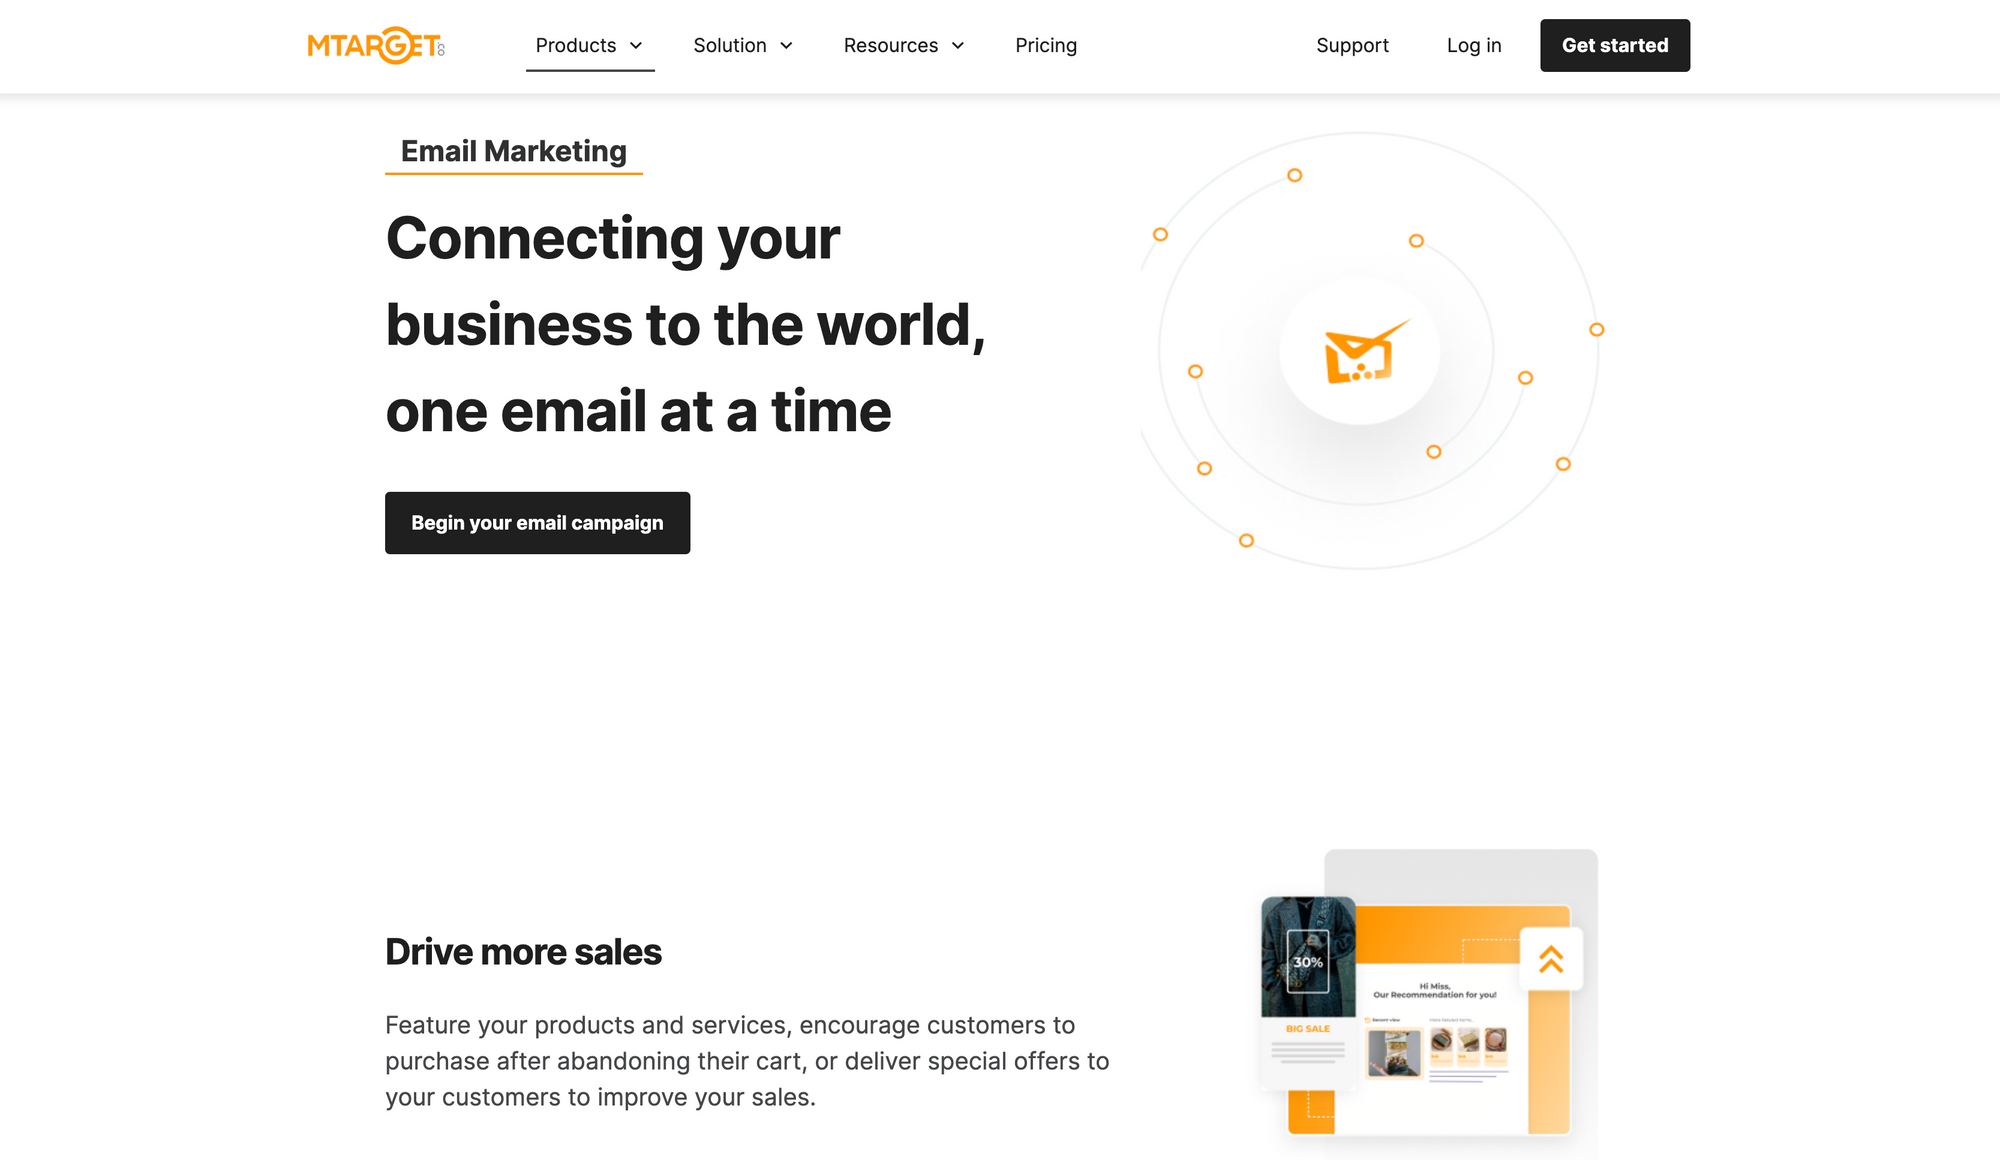 MTARGET Email Marketing: Connecting your business to the world, one email at a time.